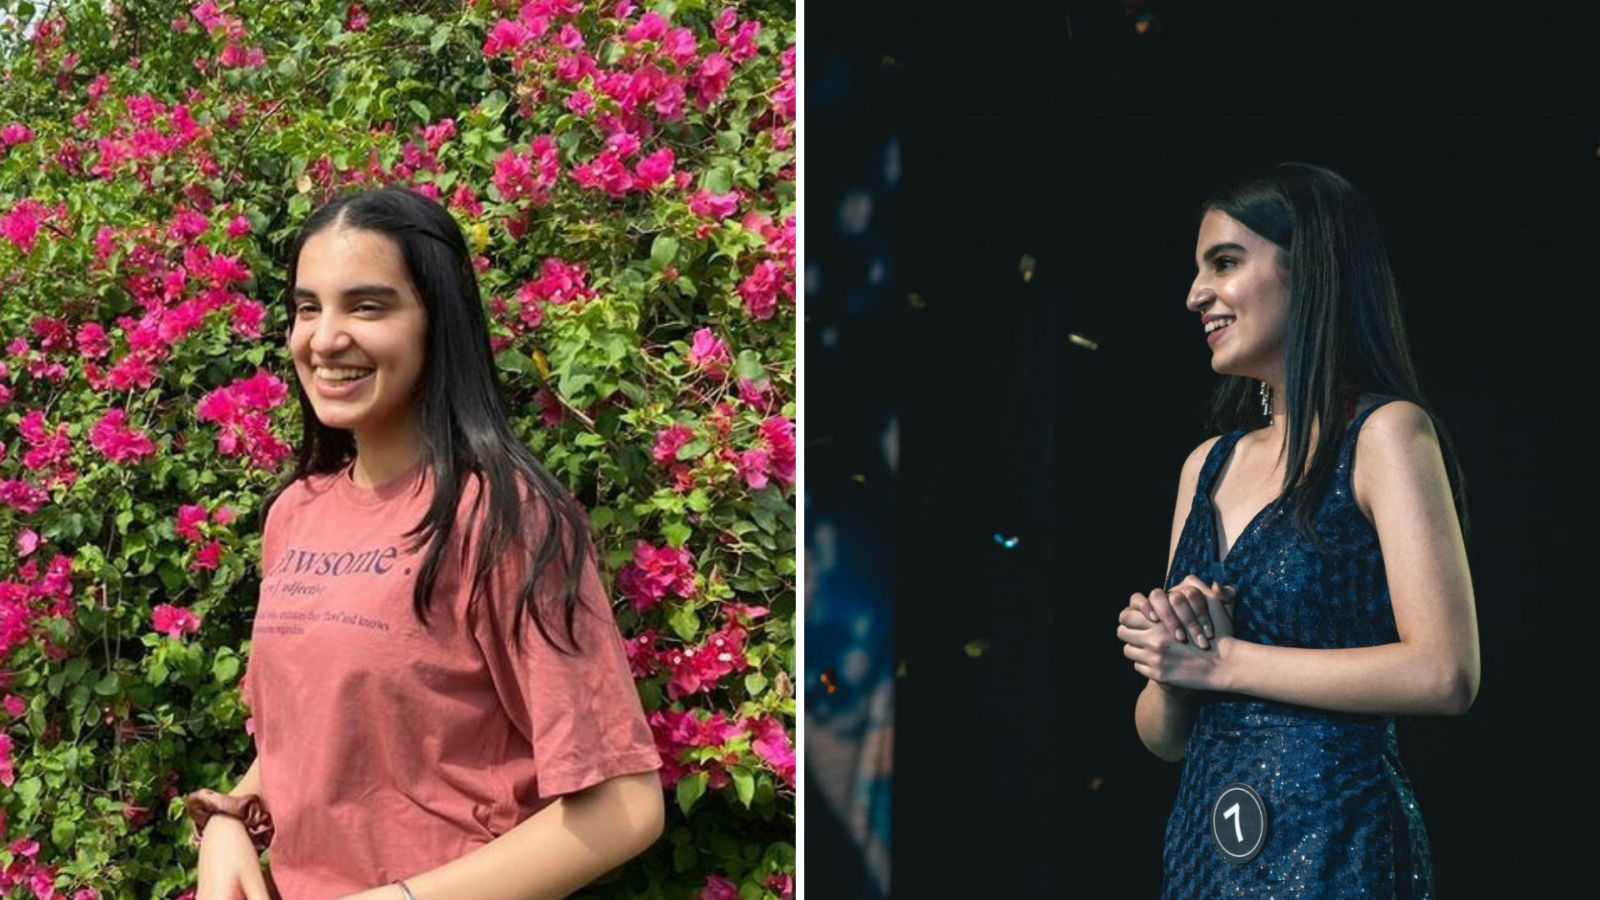 Meet Mannat Siwach, a 16-year-old from Jaipur and the winner of Miss Teen International India 2021